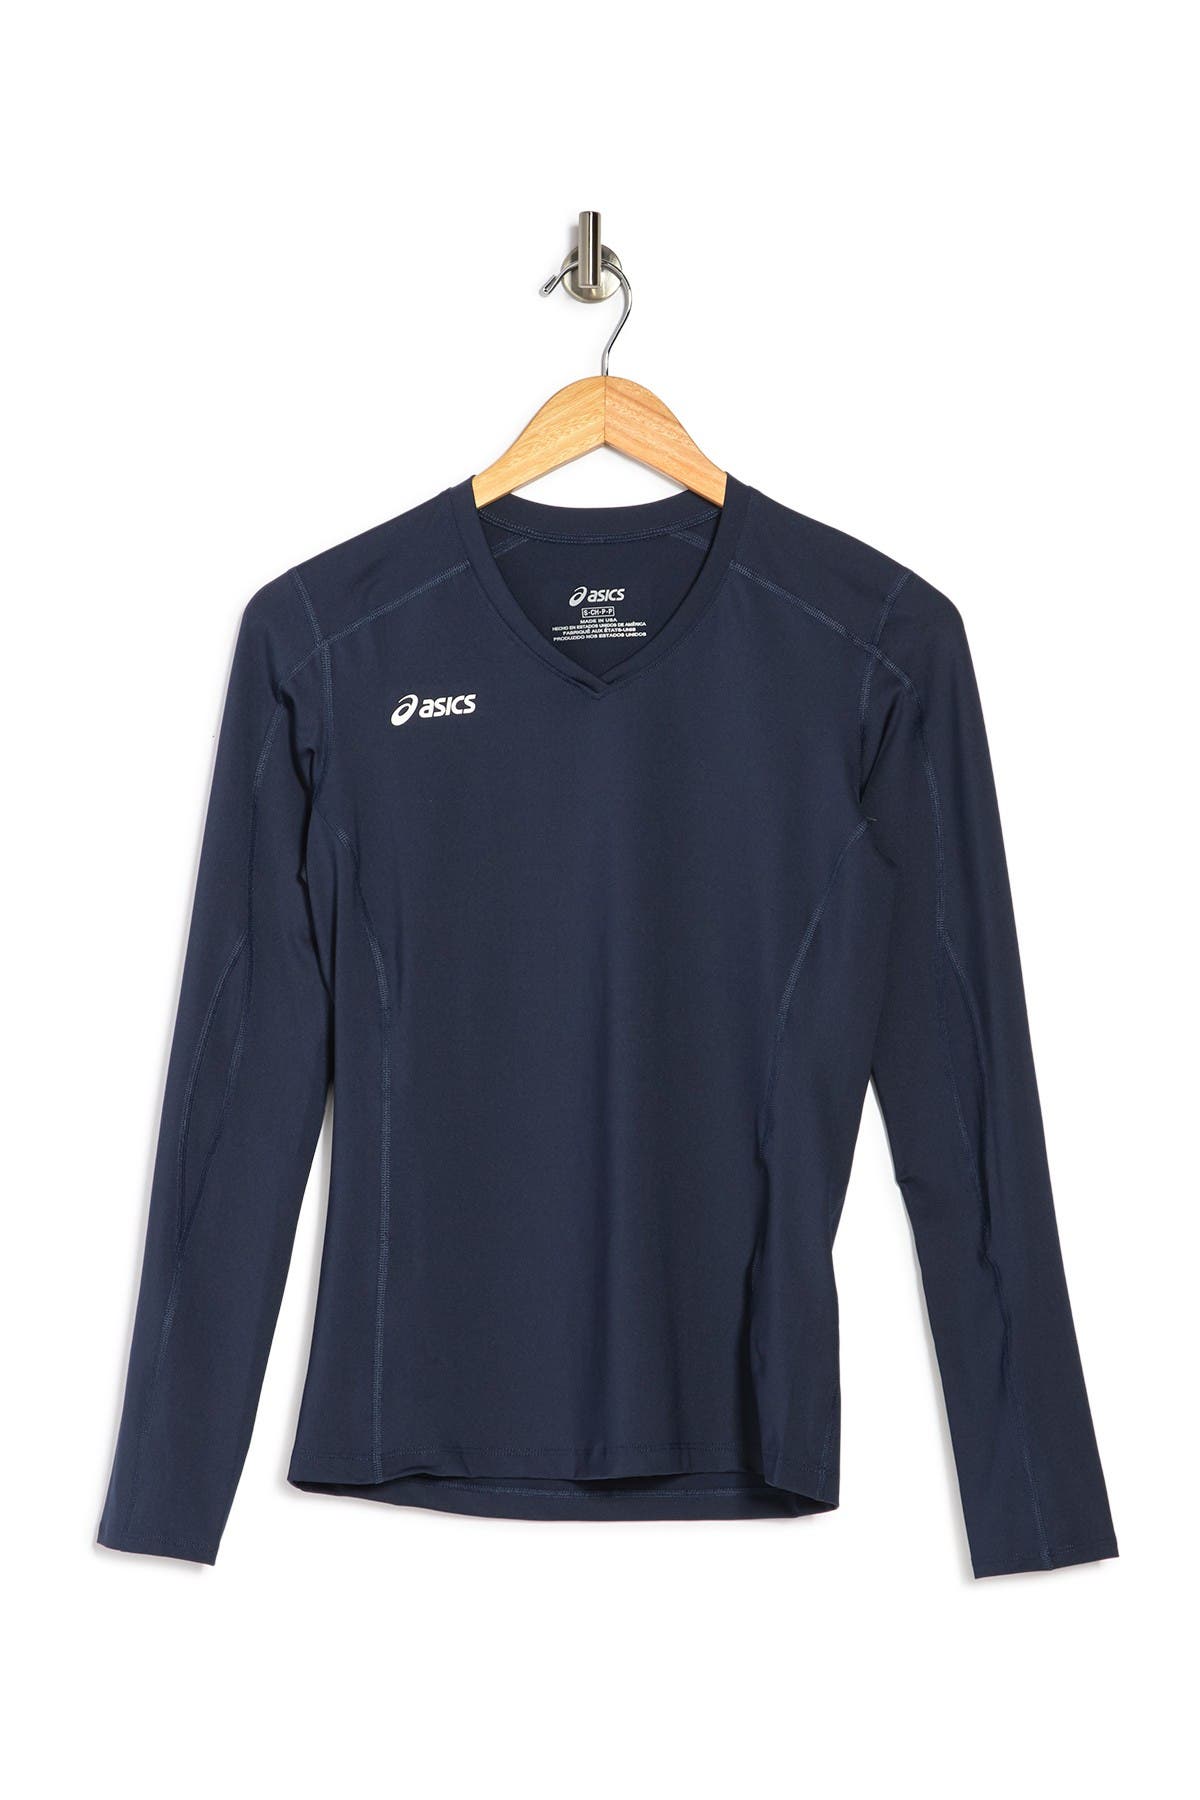 Asics Roll Shot Performance Jersey In Navy